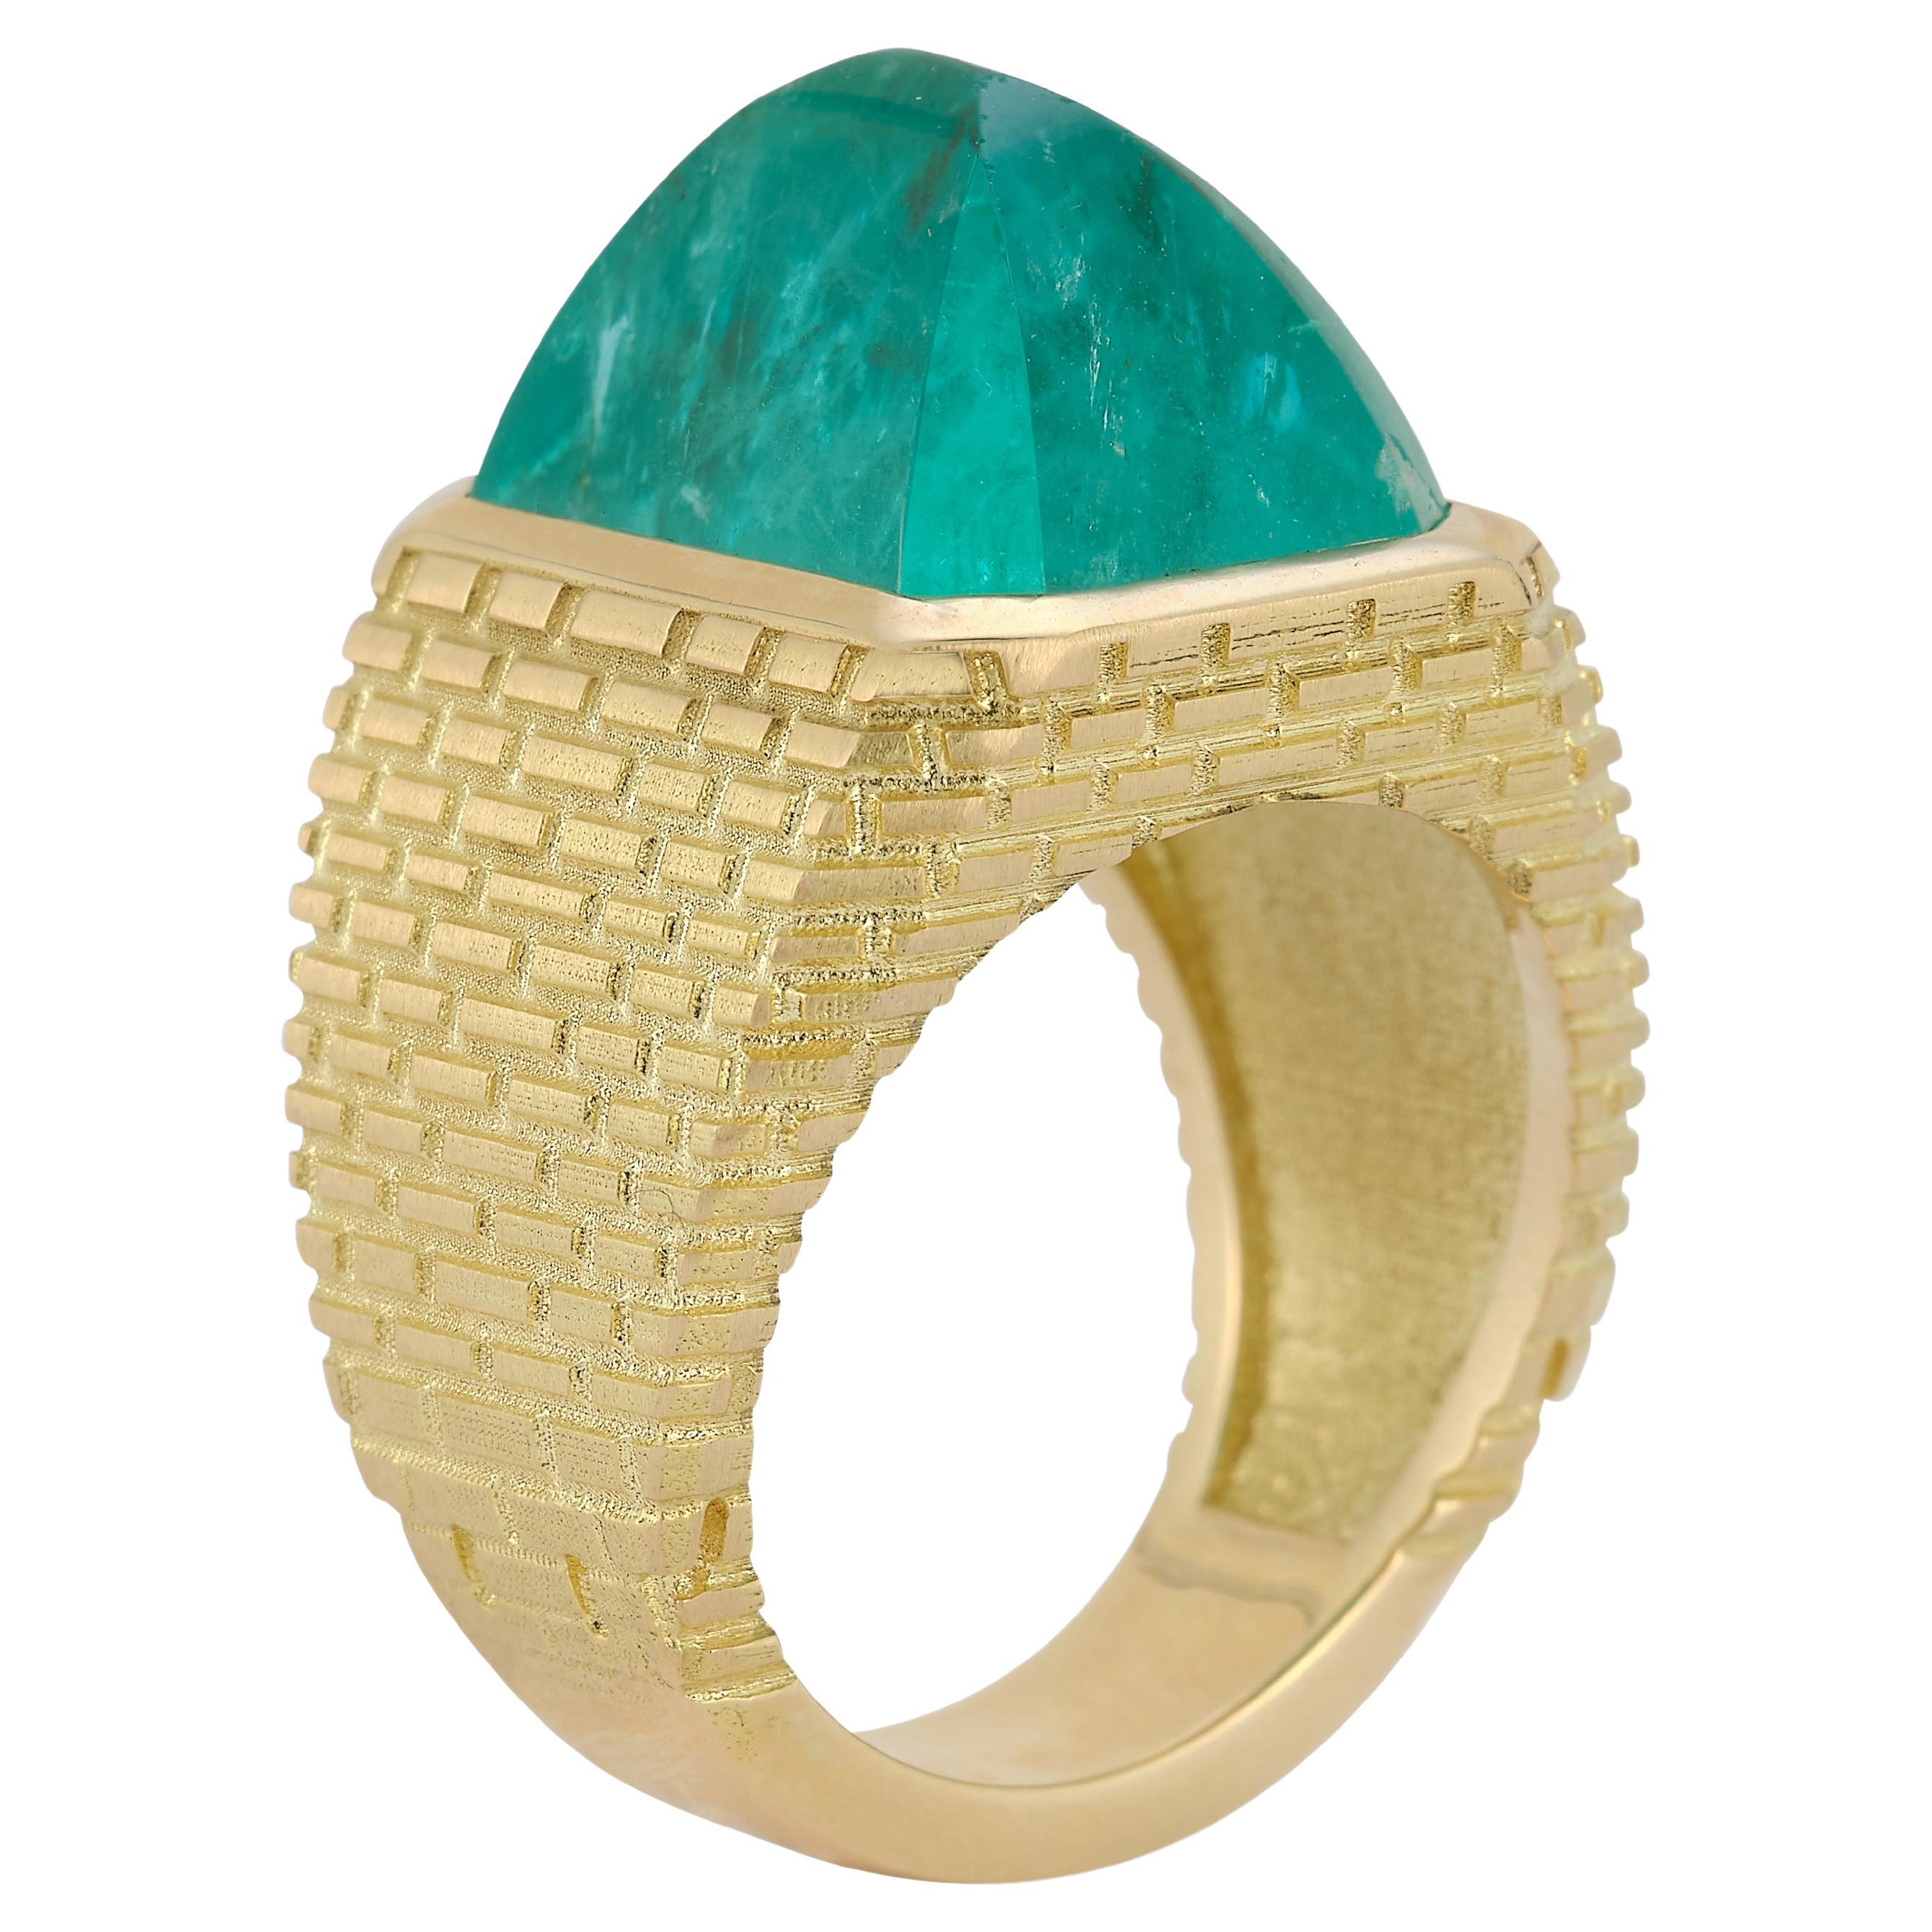 What does an emerald ring represent?